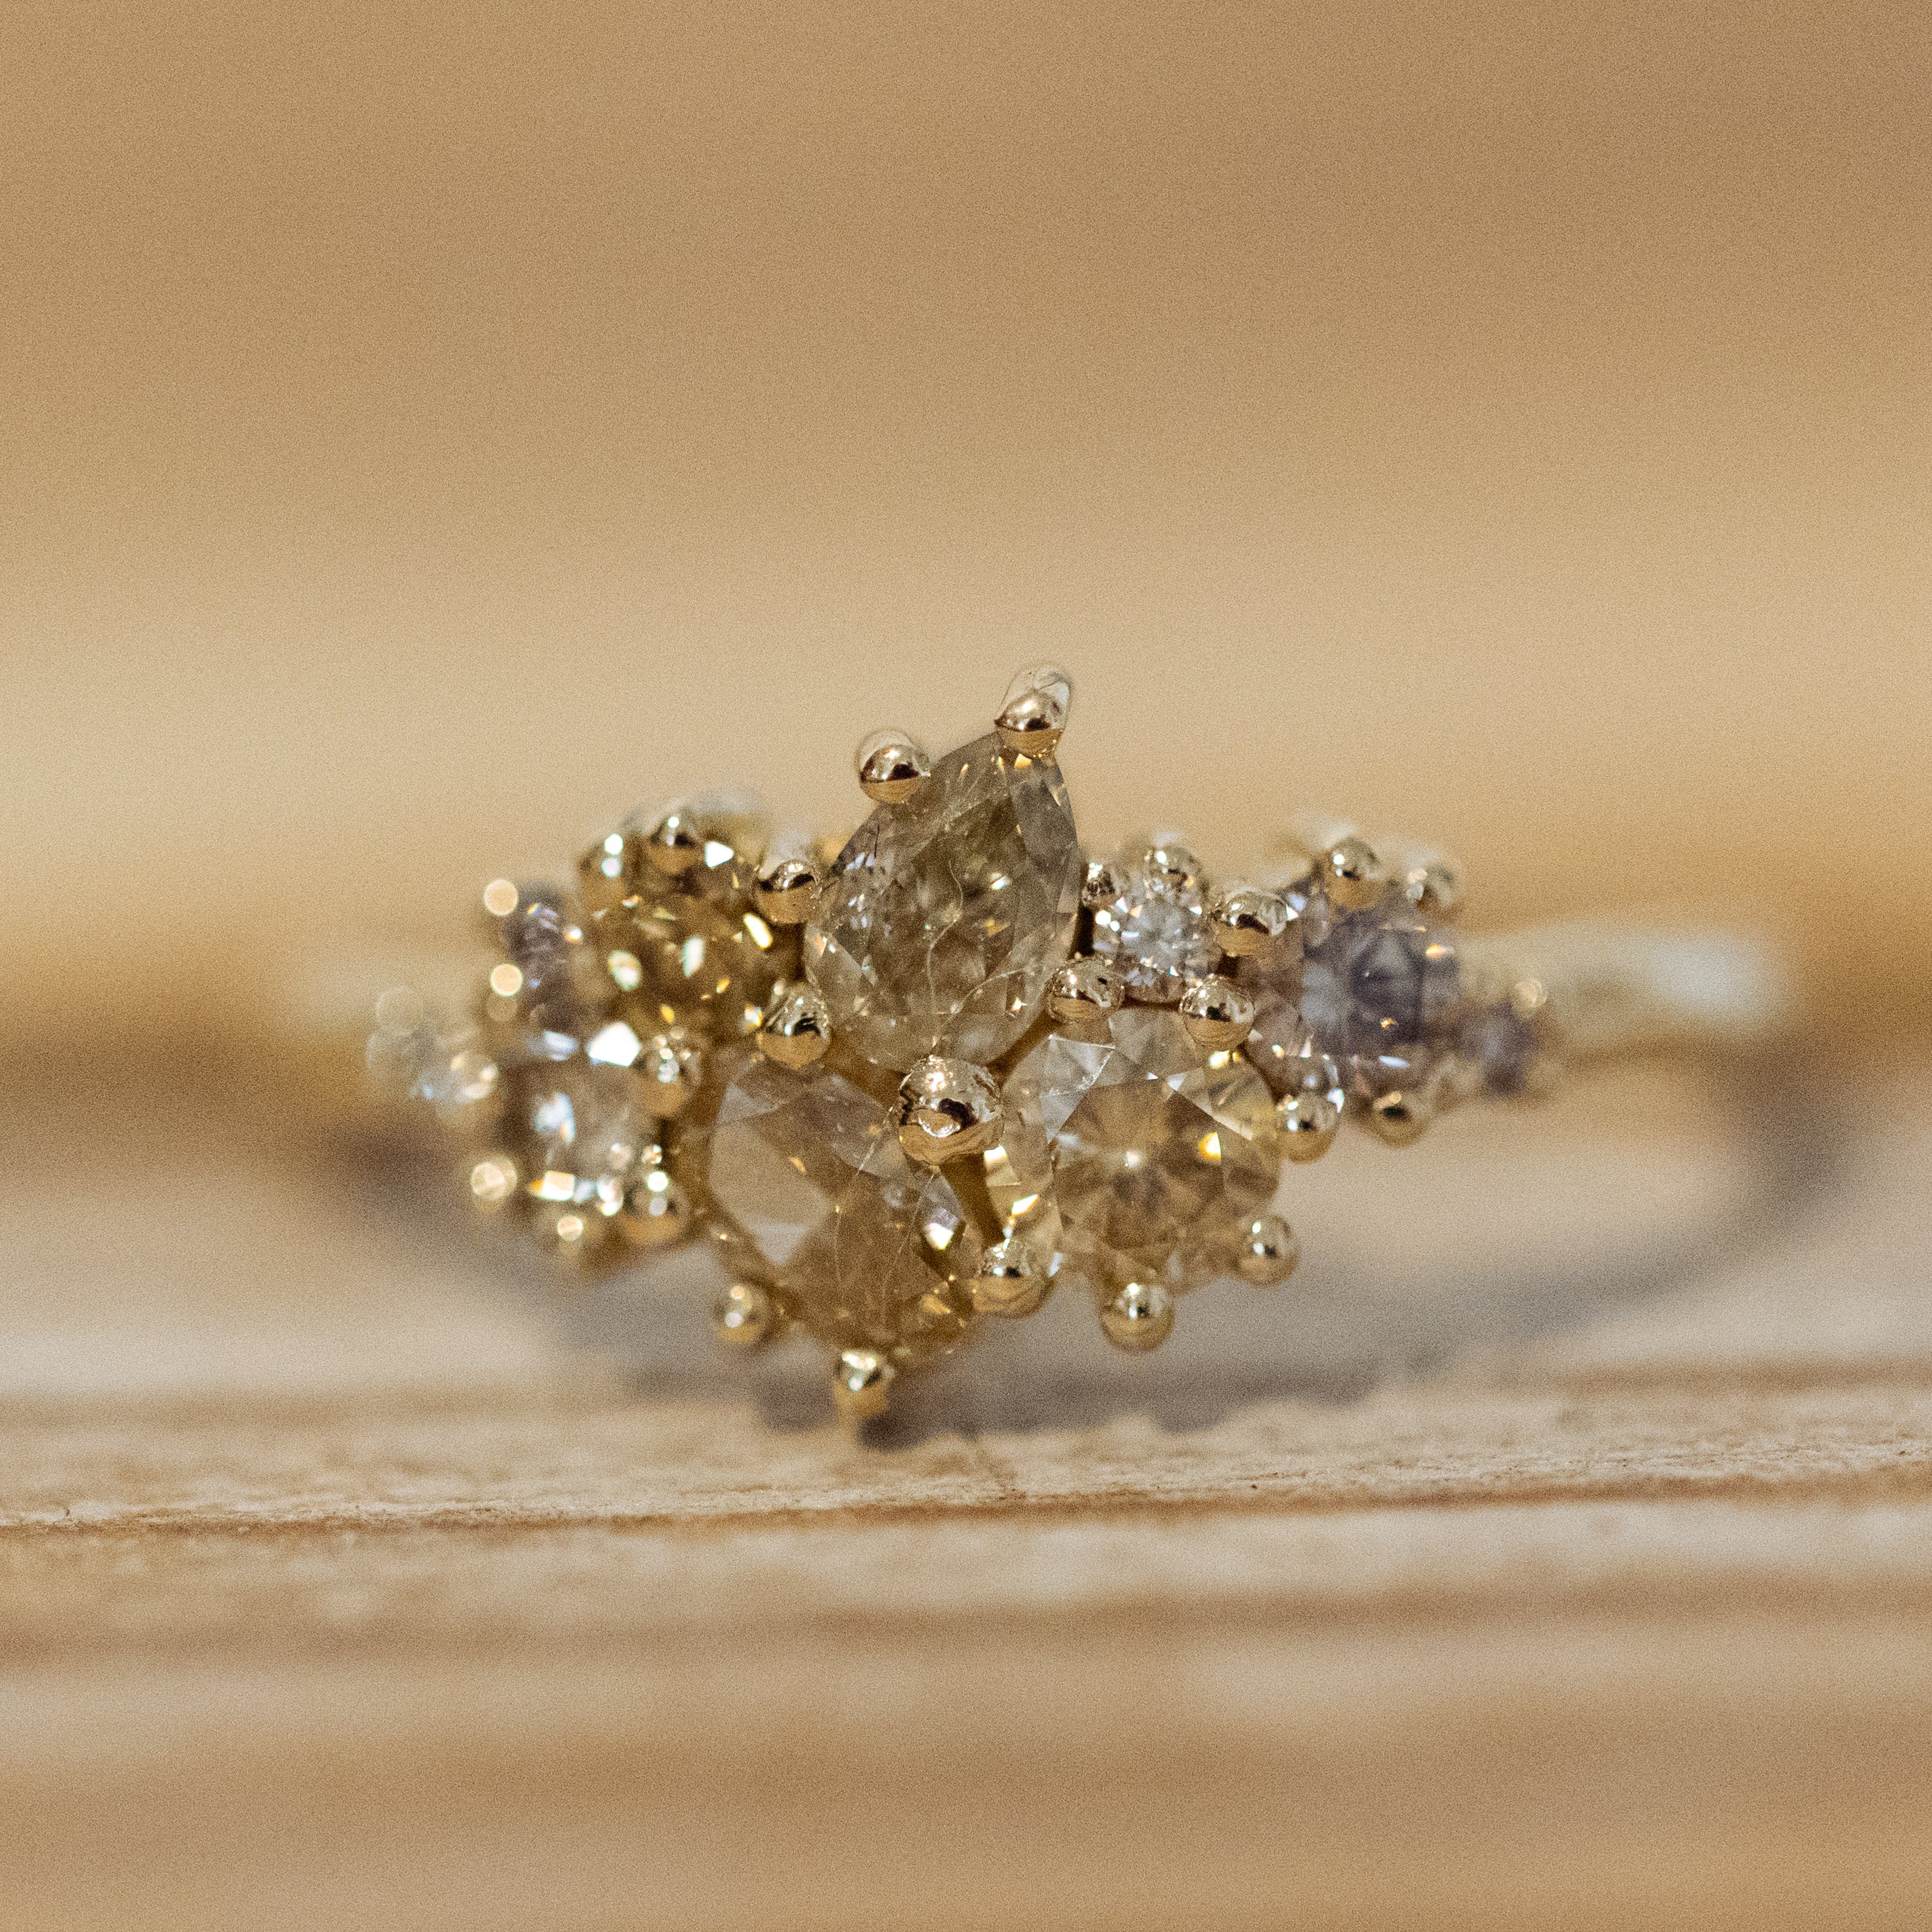 Enormous champagne cluster ring